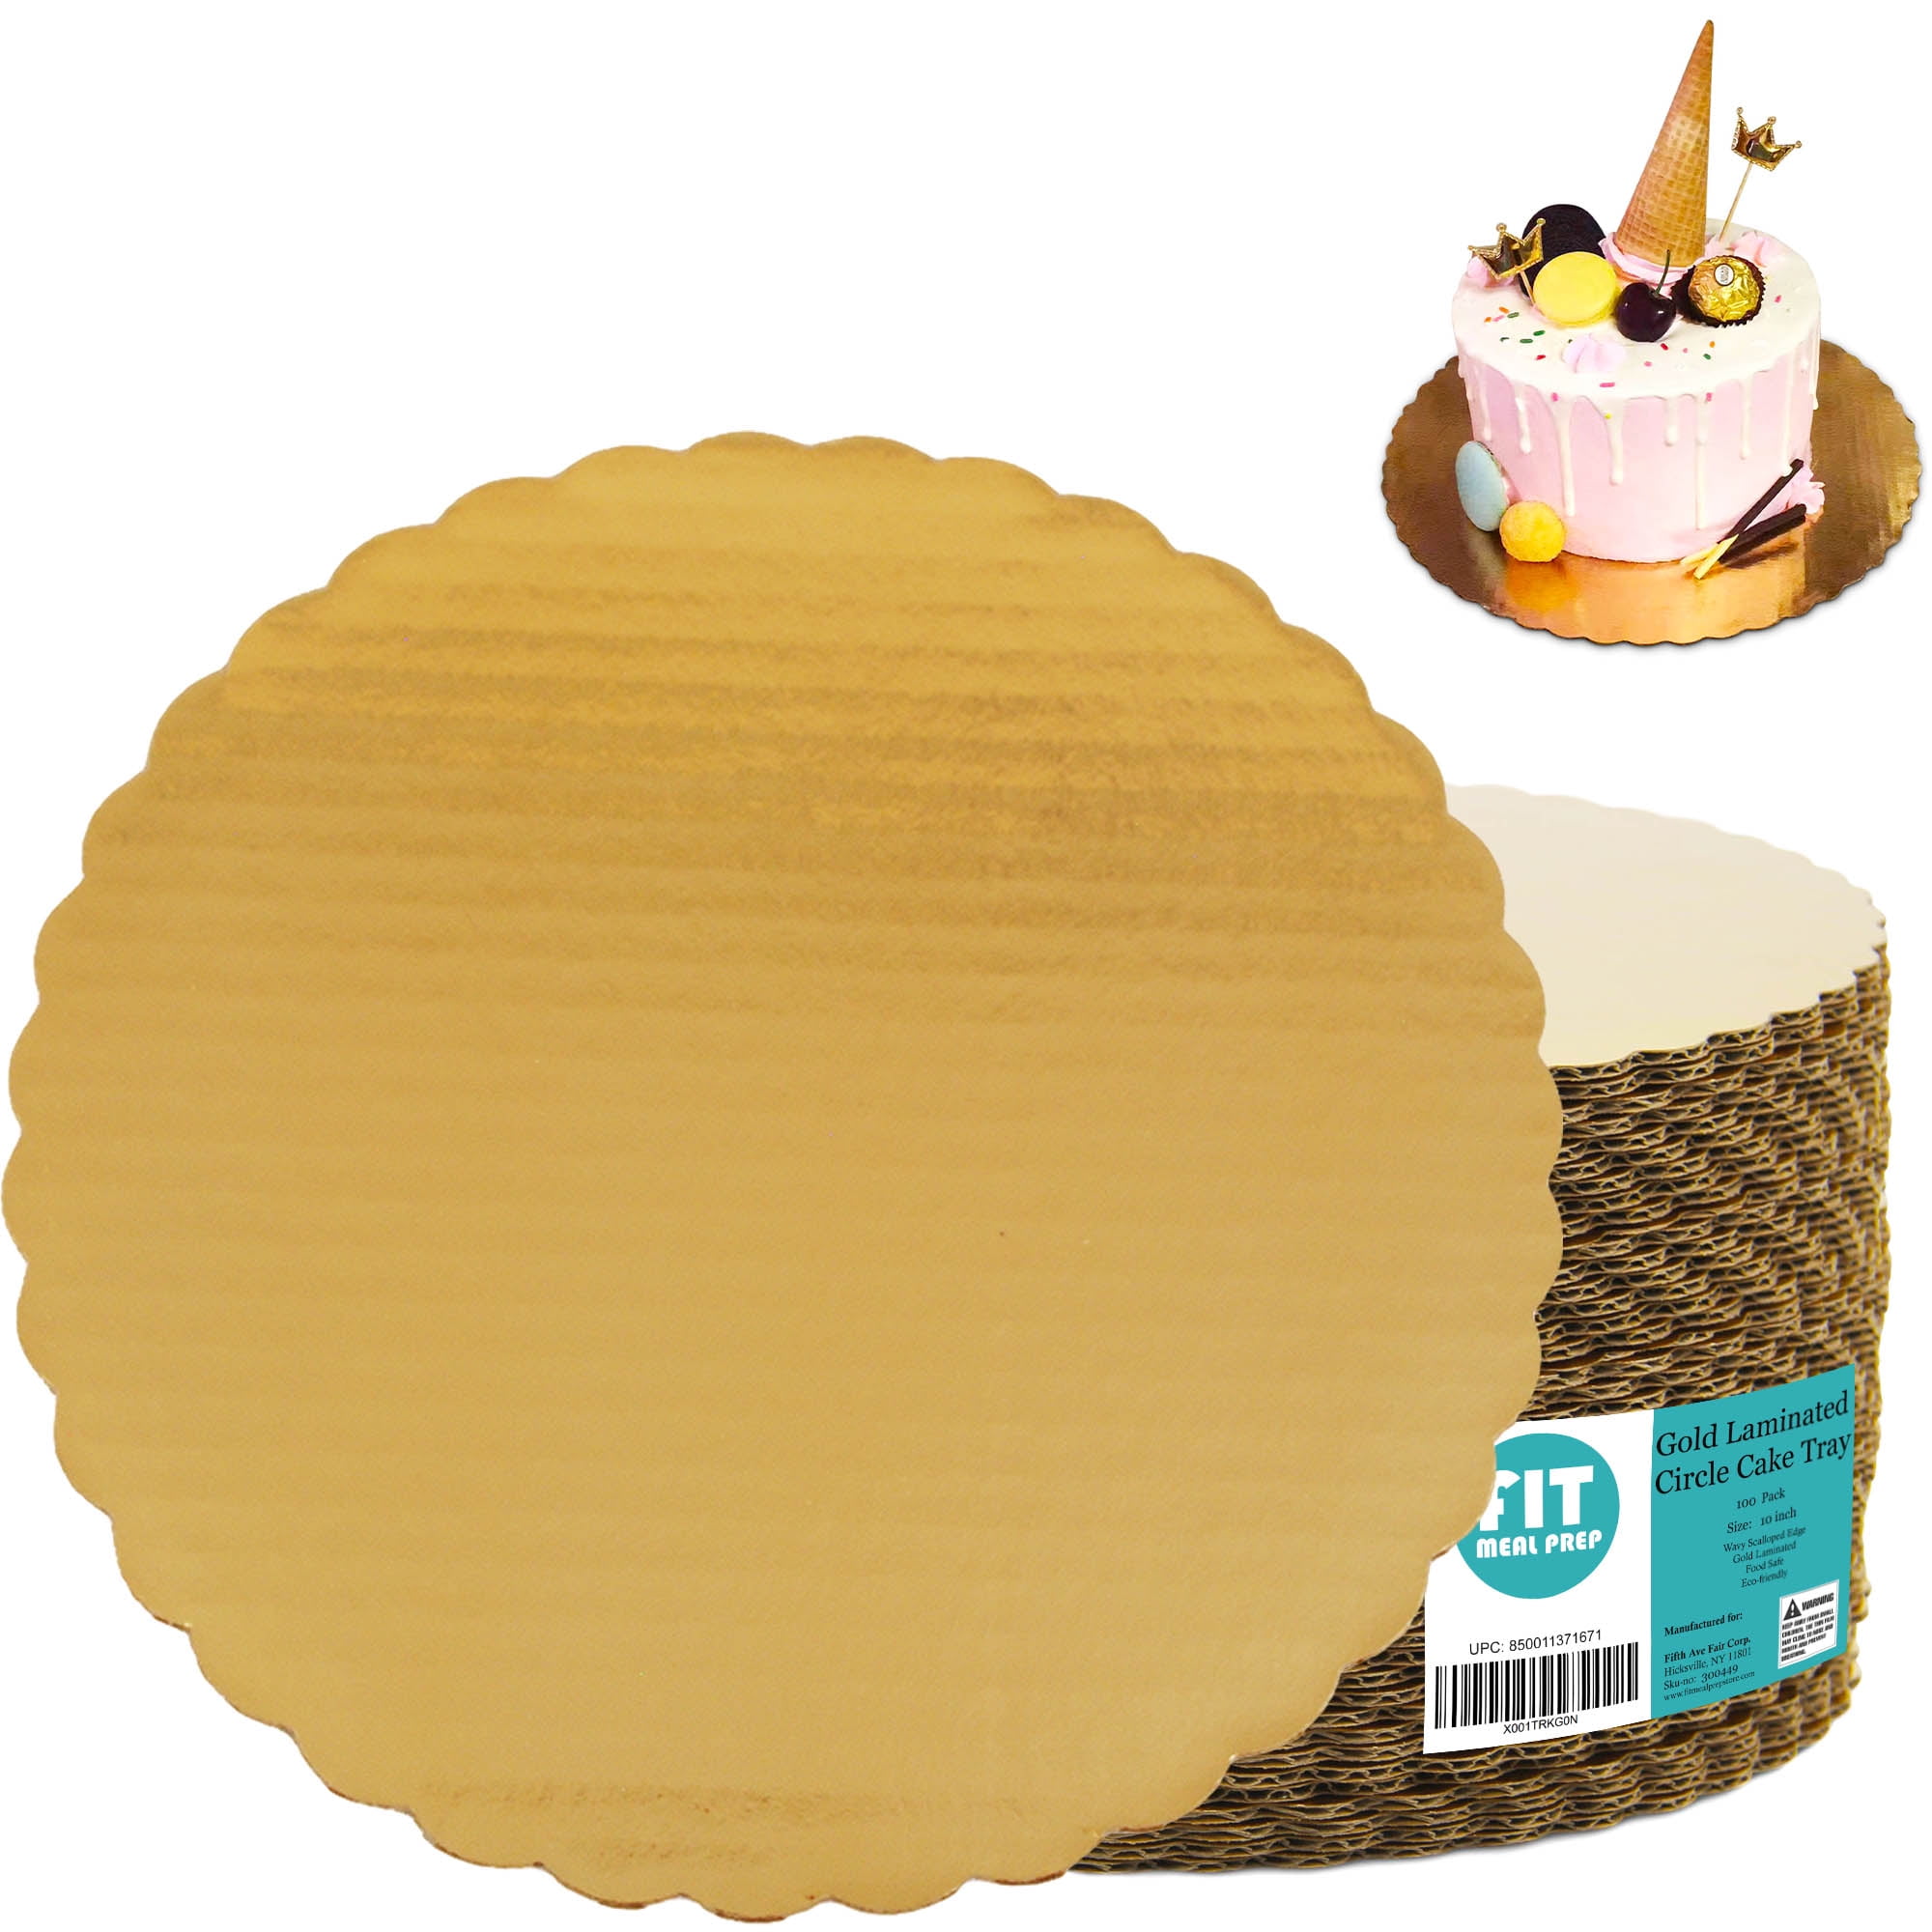 SafePro 10RGS 100pcs 10-Inch Gold Round Scalloped Cardboard Cake Pads 